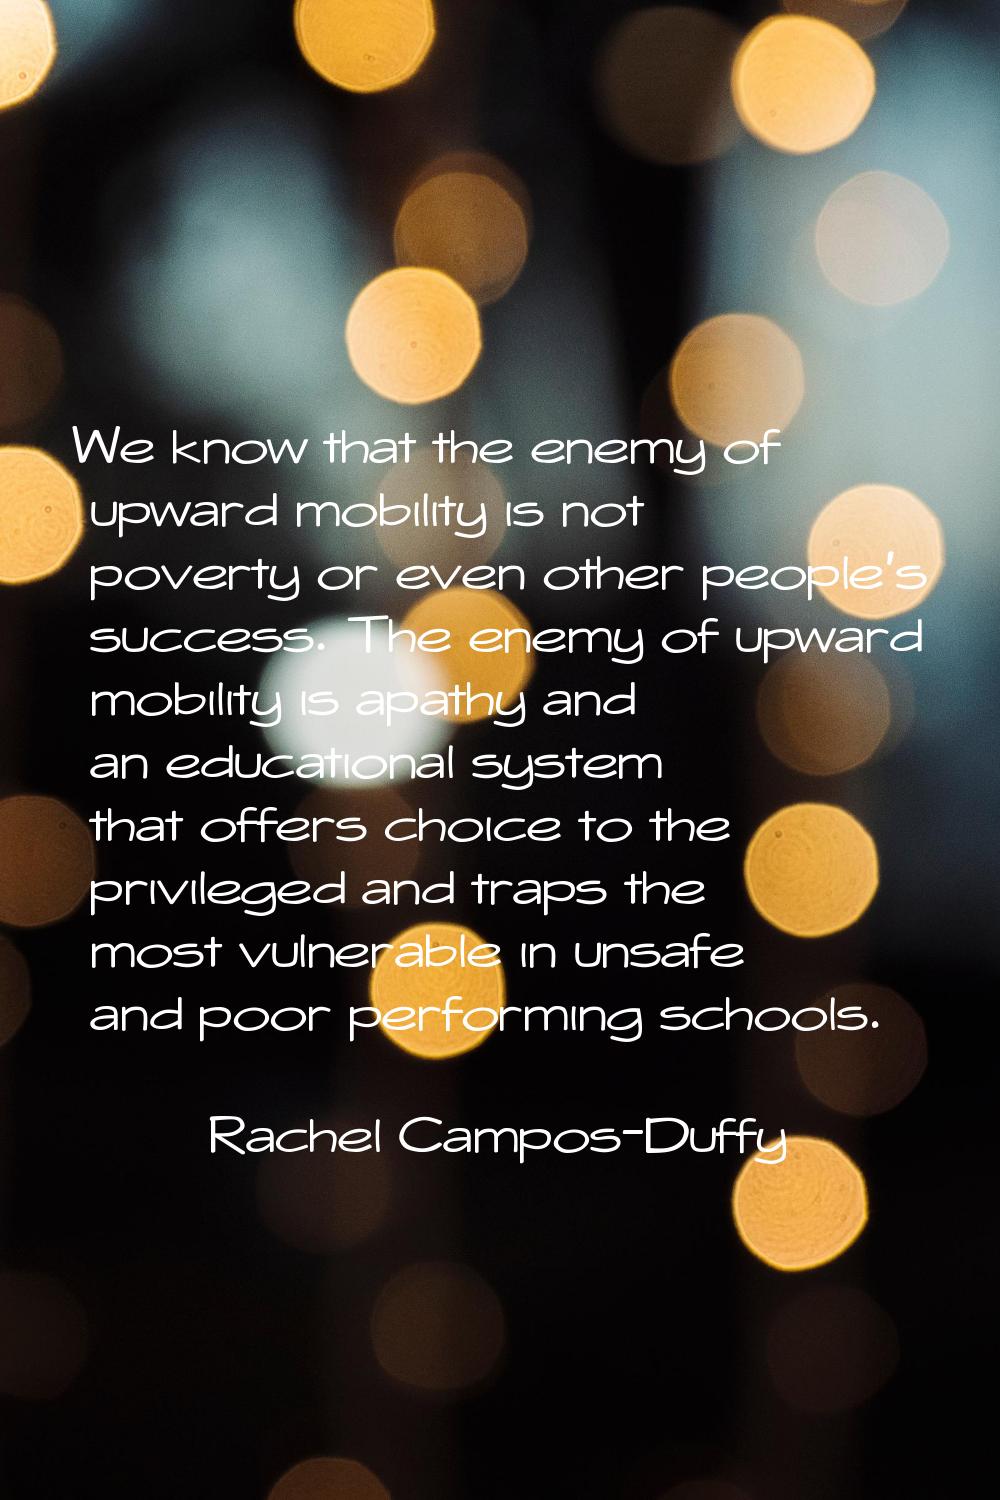 We know that the enemy of upward mobility is not poverty or even other people's success. The enemy 